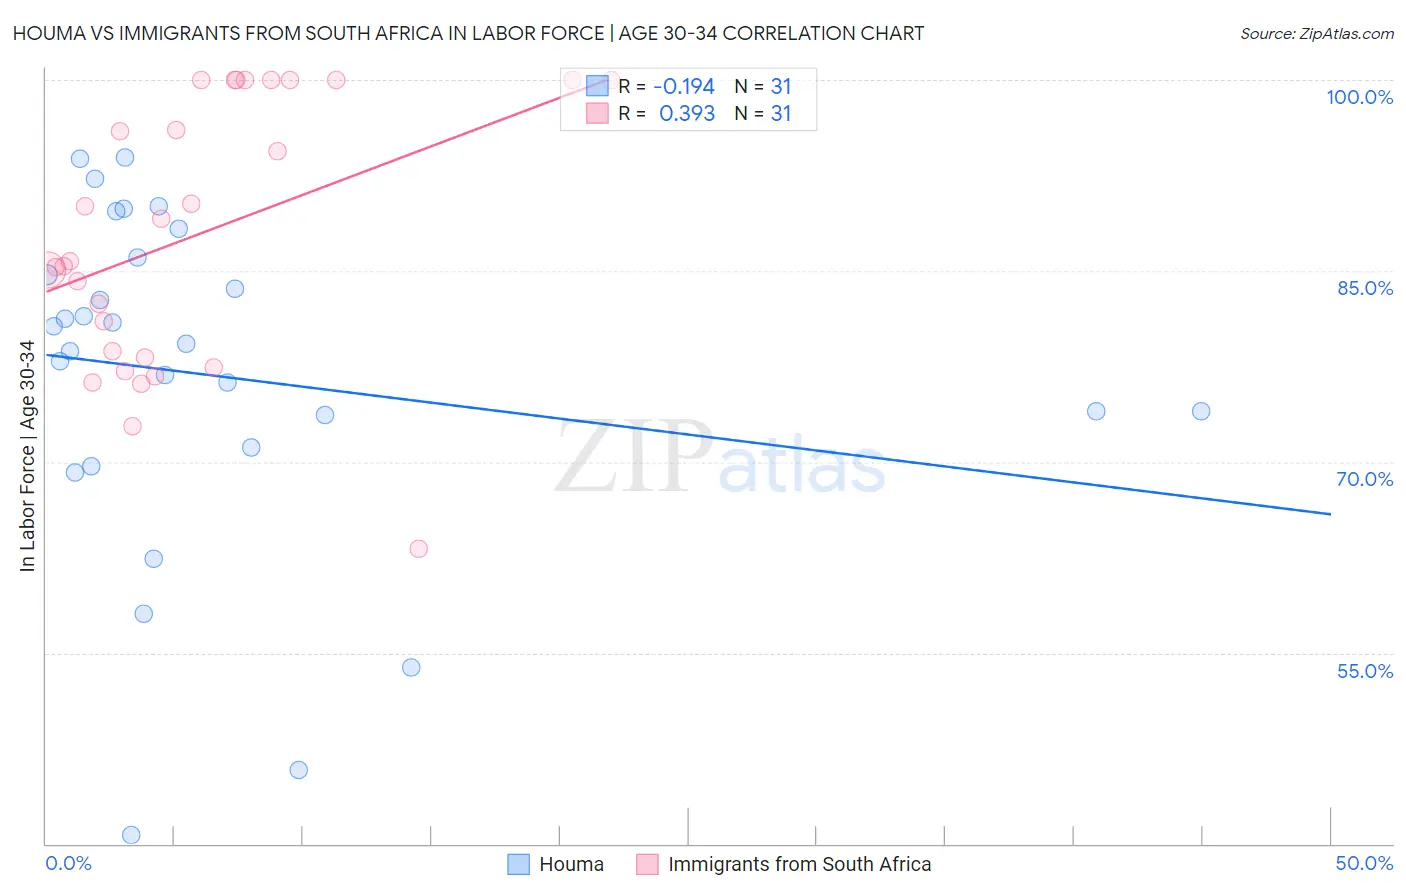 Houma vs Immigrants from South Africa In Labor Force | Age 30-34